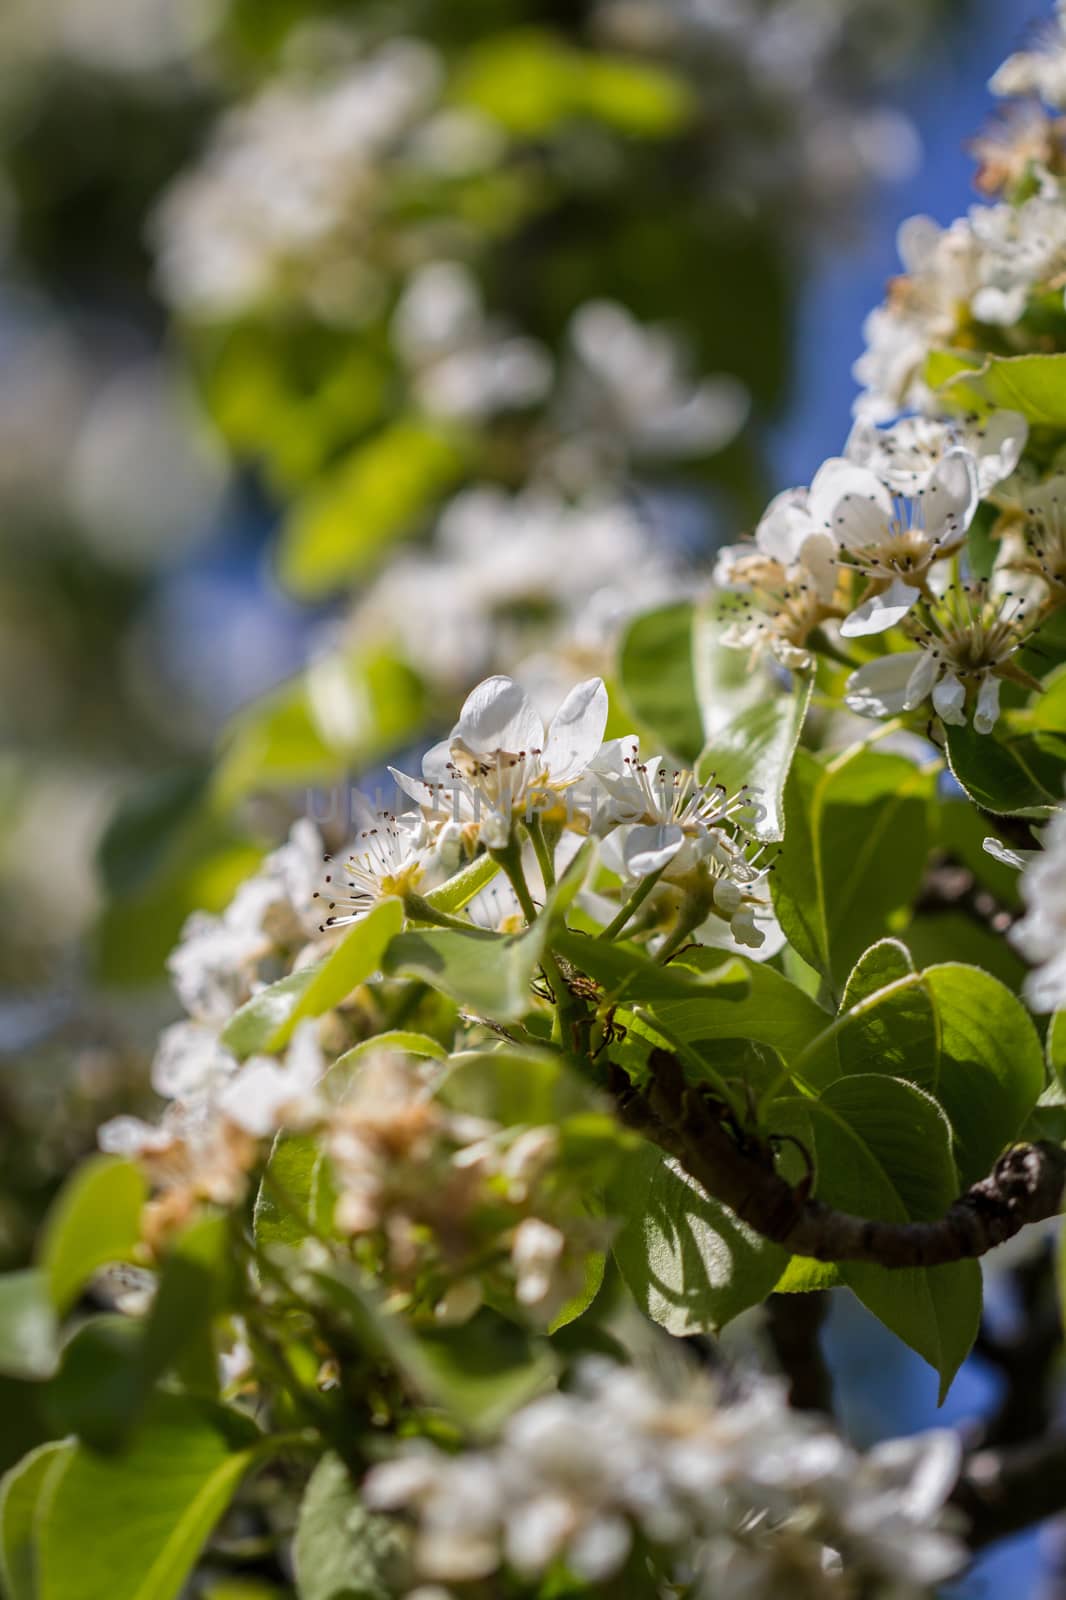 A close up of Pear Blossoms in the spring sunshine